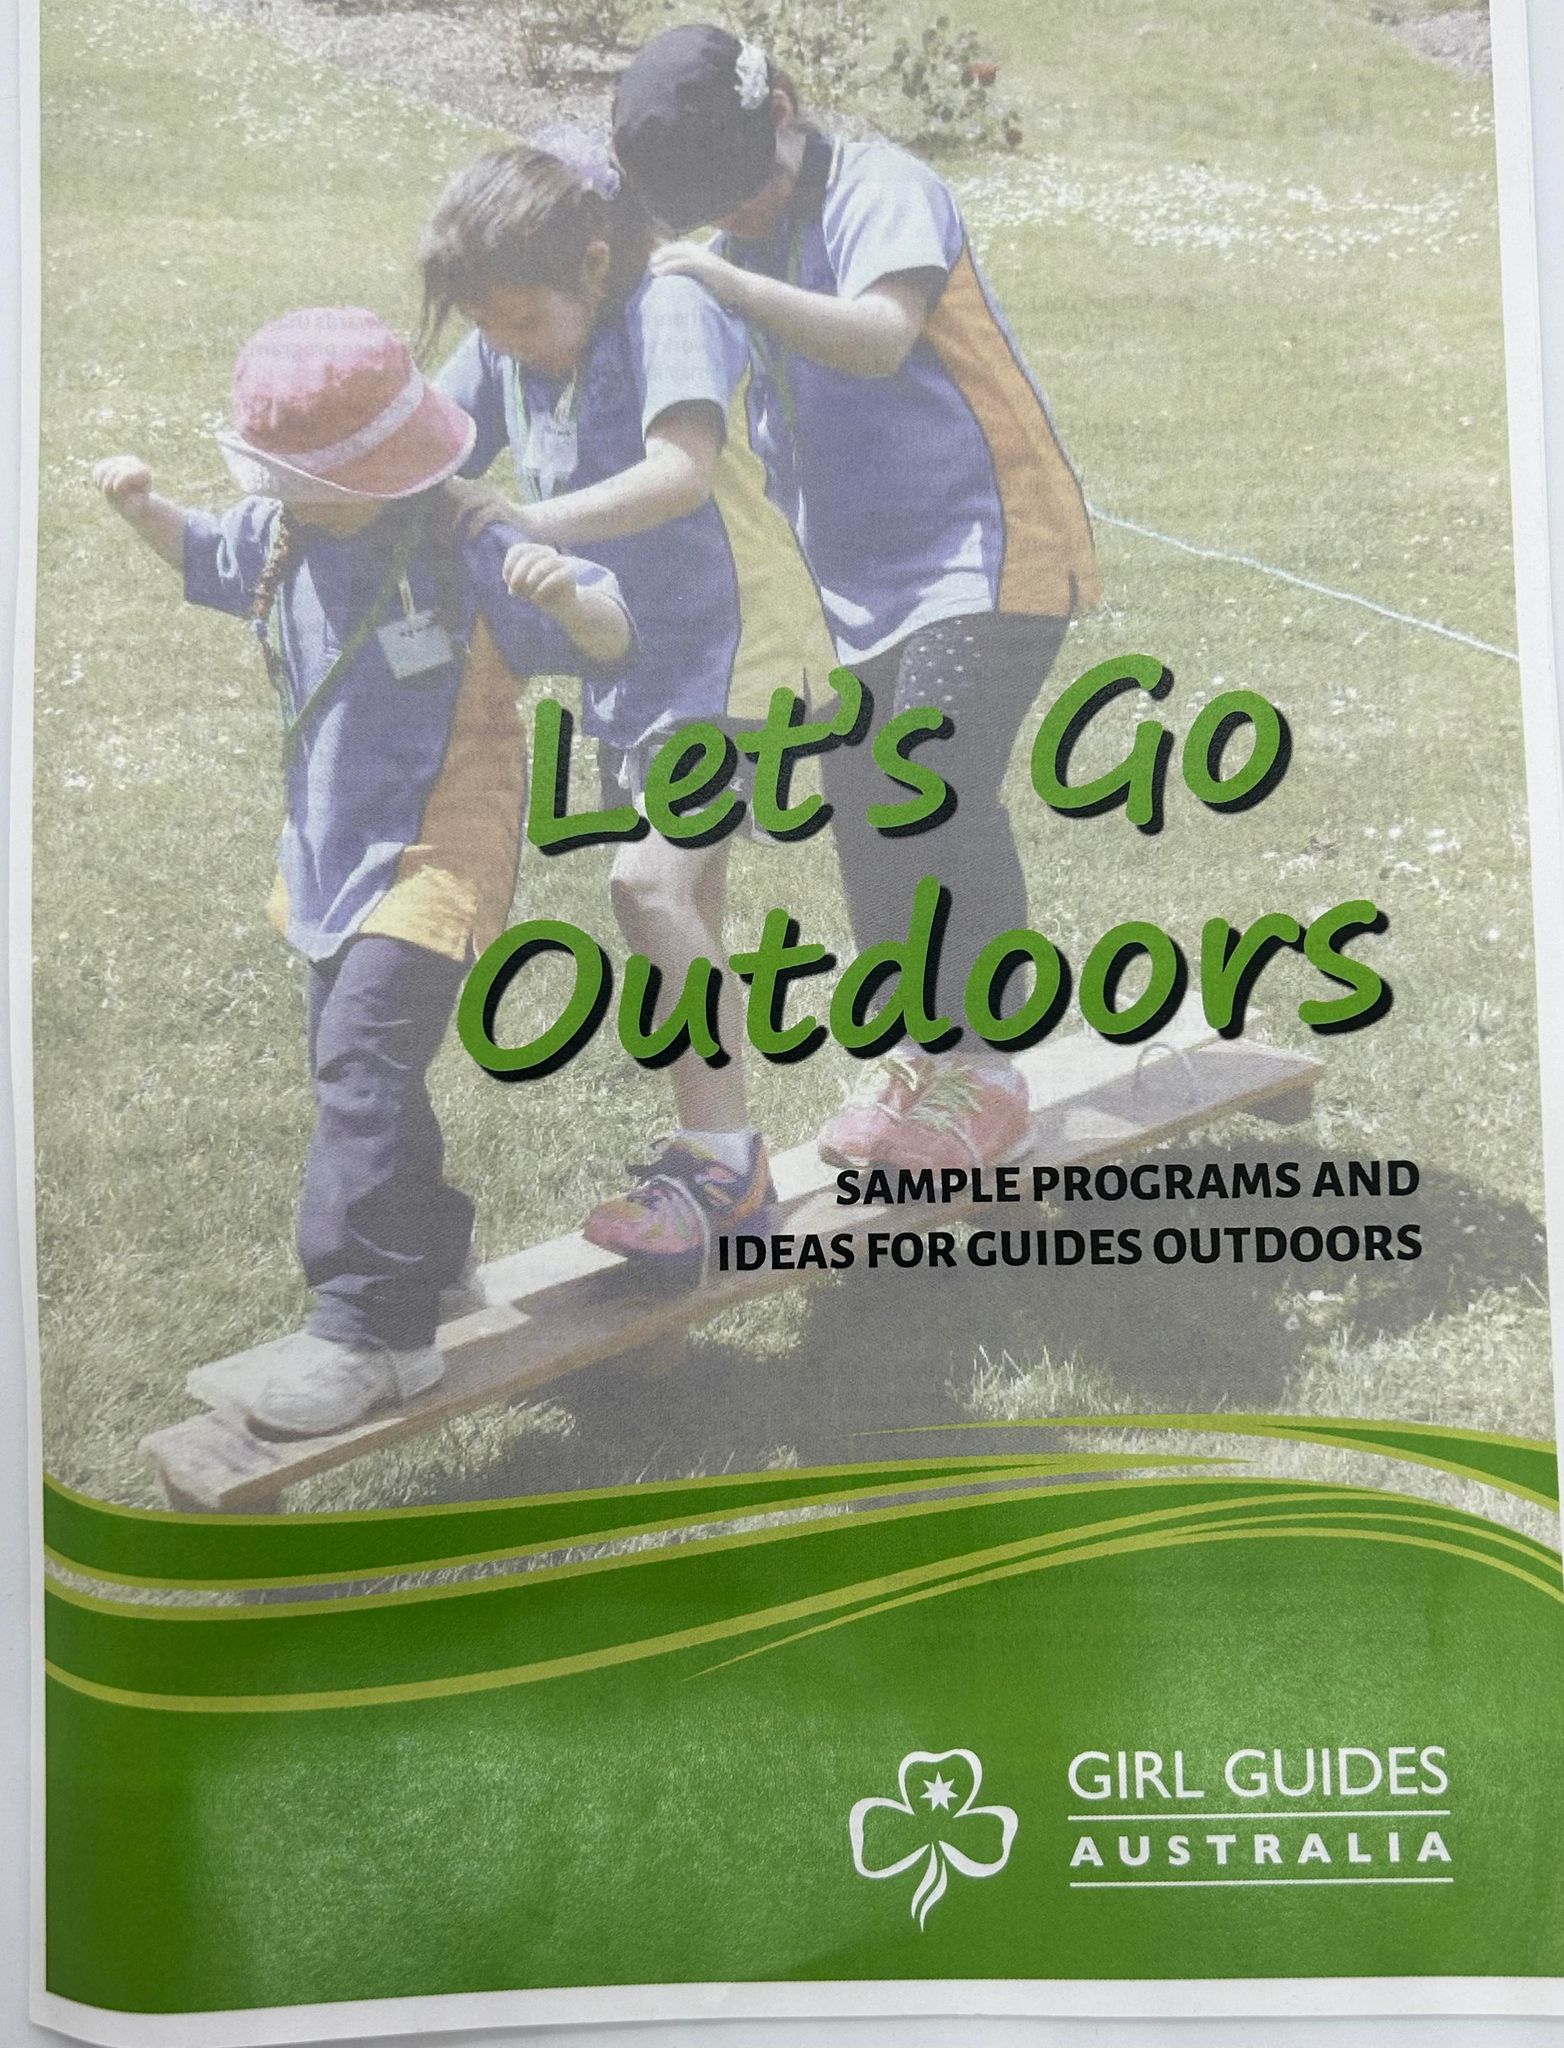 a paper based resource with sample ideas for guides outdoors